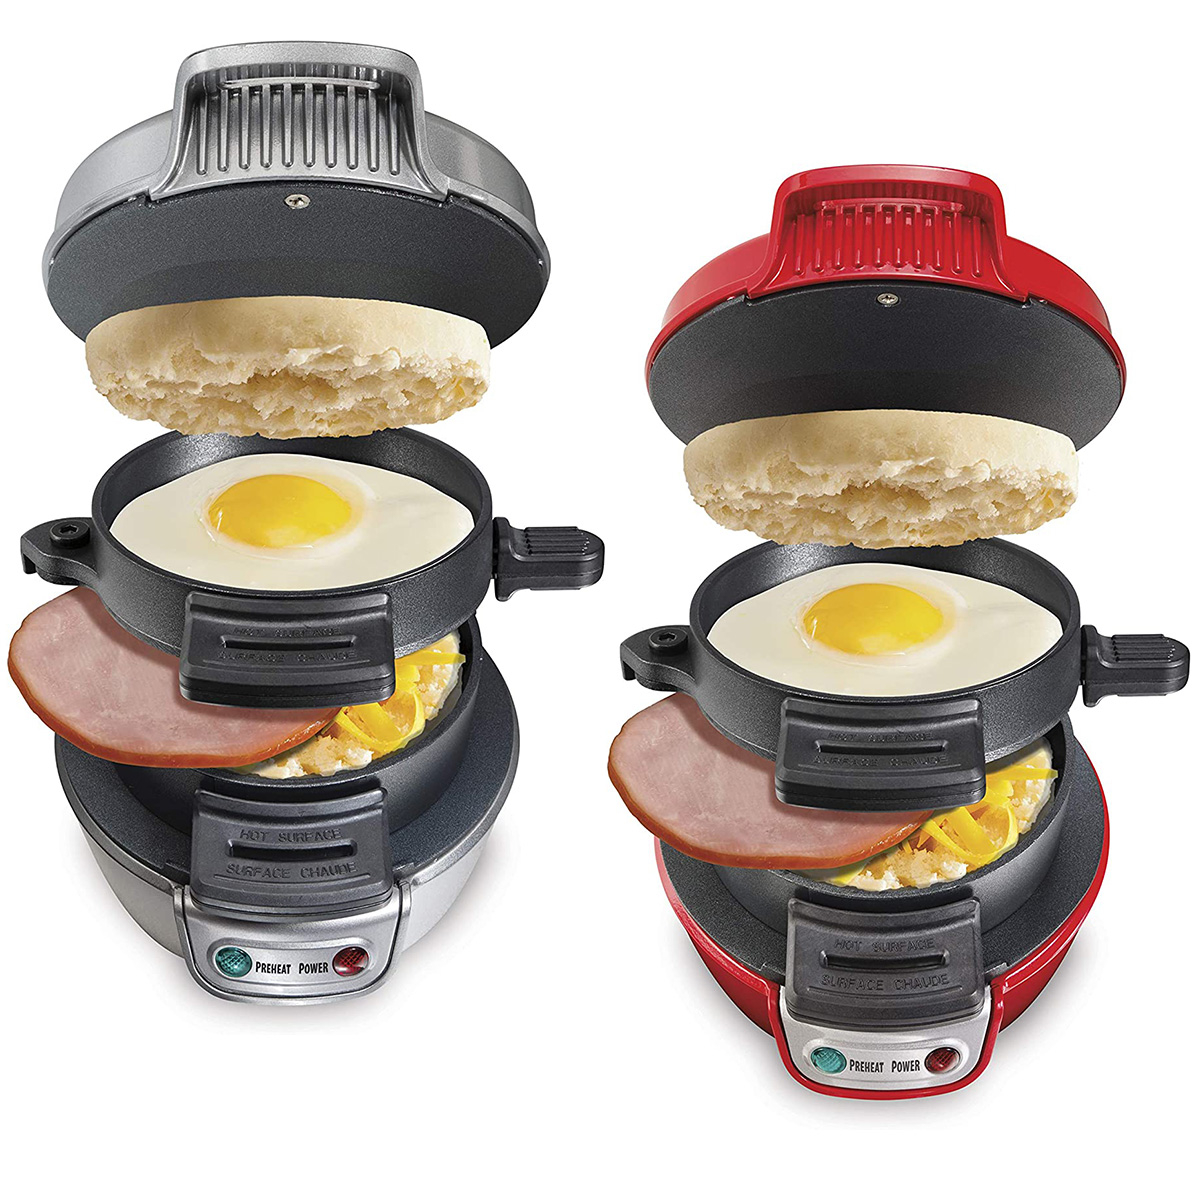 https://akns-images.eonline.com/eol_images/Entire_Site/20221026/rs_1200x1200-221126121142-1200.ecomm-Breakfast-Sandwich-Maker.ct.jpg?fit=around%7C1080:540&output-quality=90&crop=1080:540;center,top